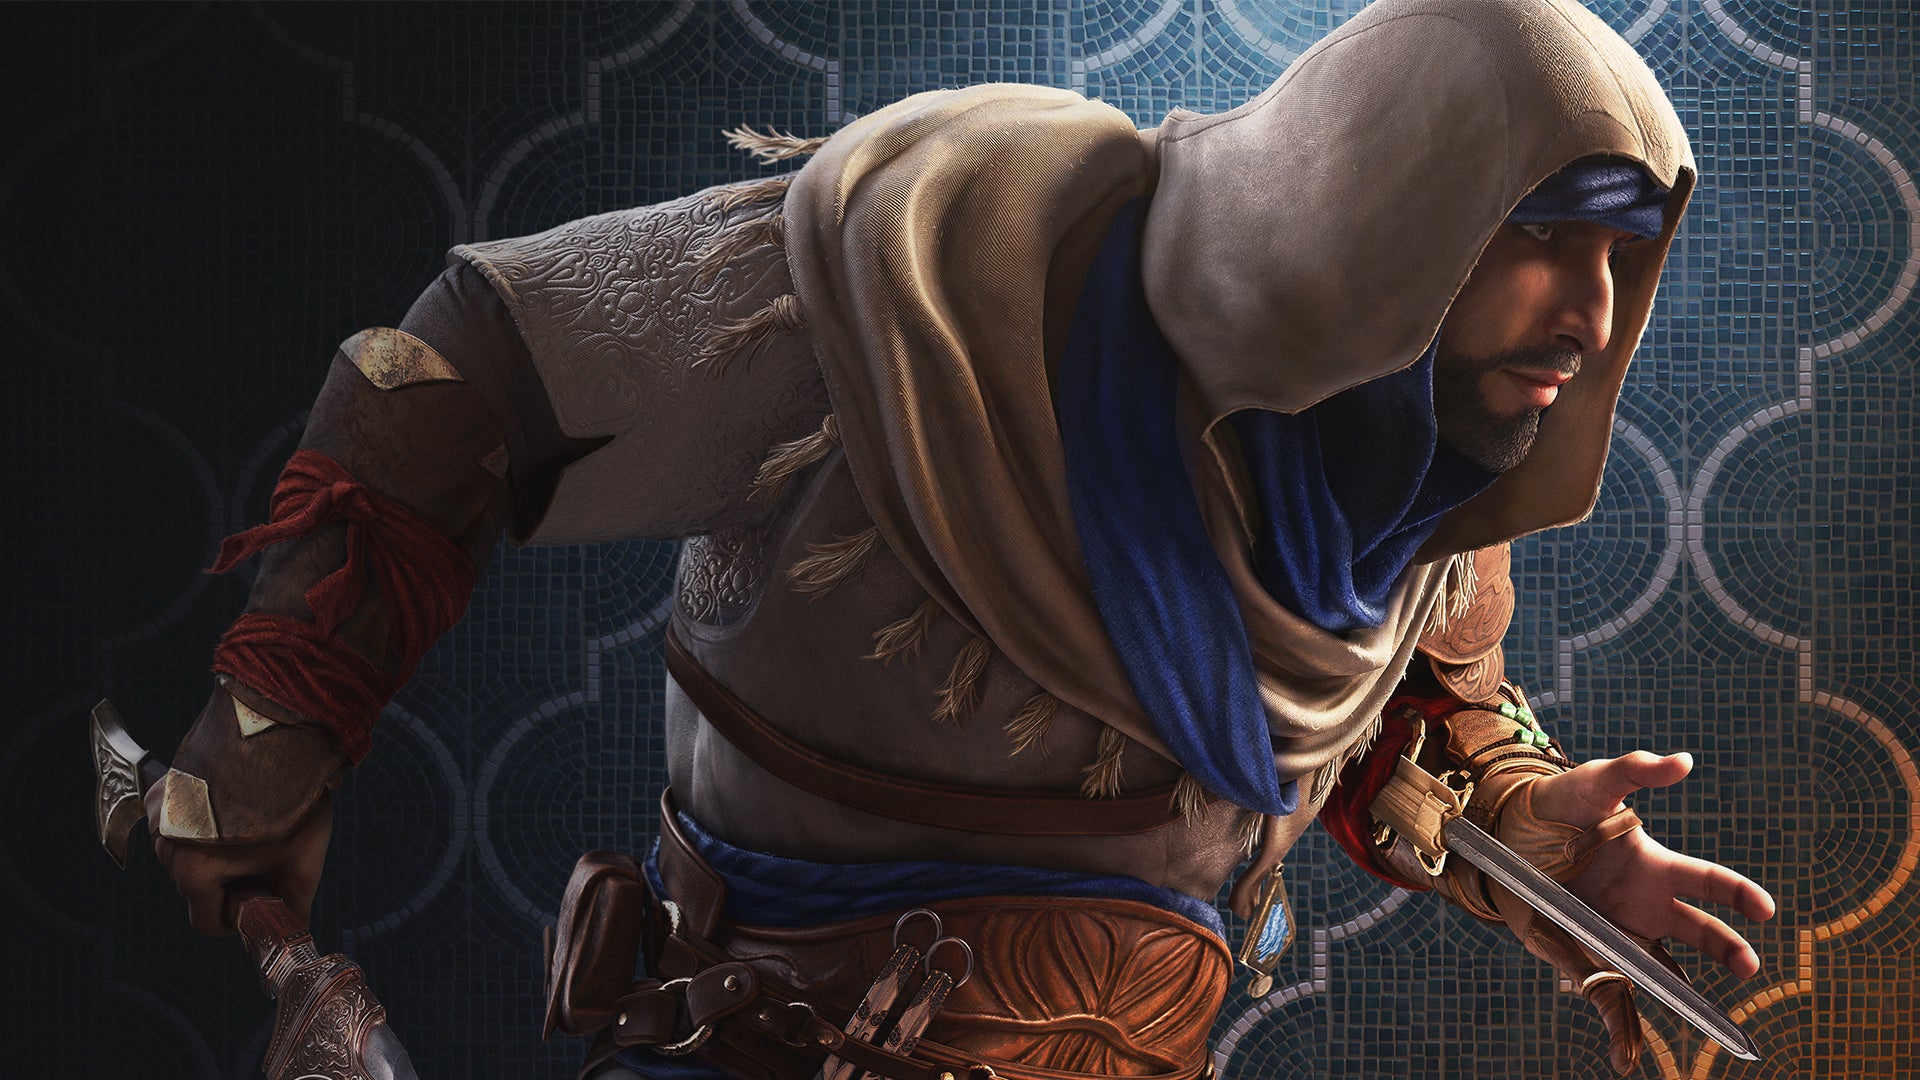 More Assassin's Creed games than reported coming, says Ubisoft - Polygon